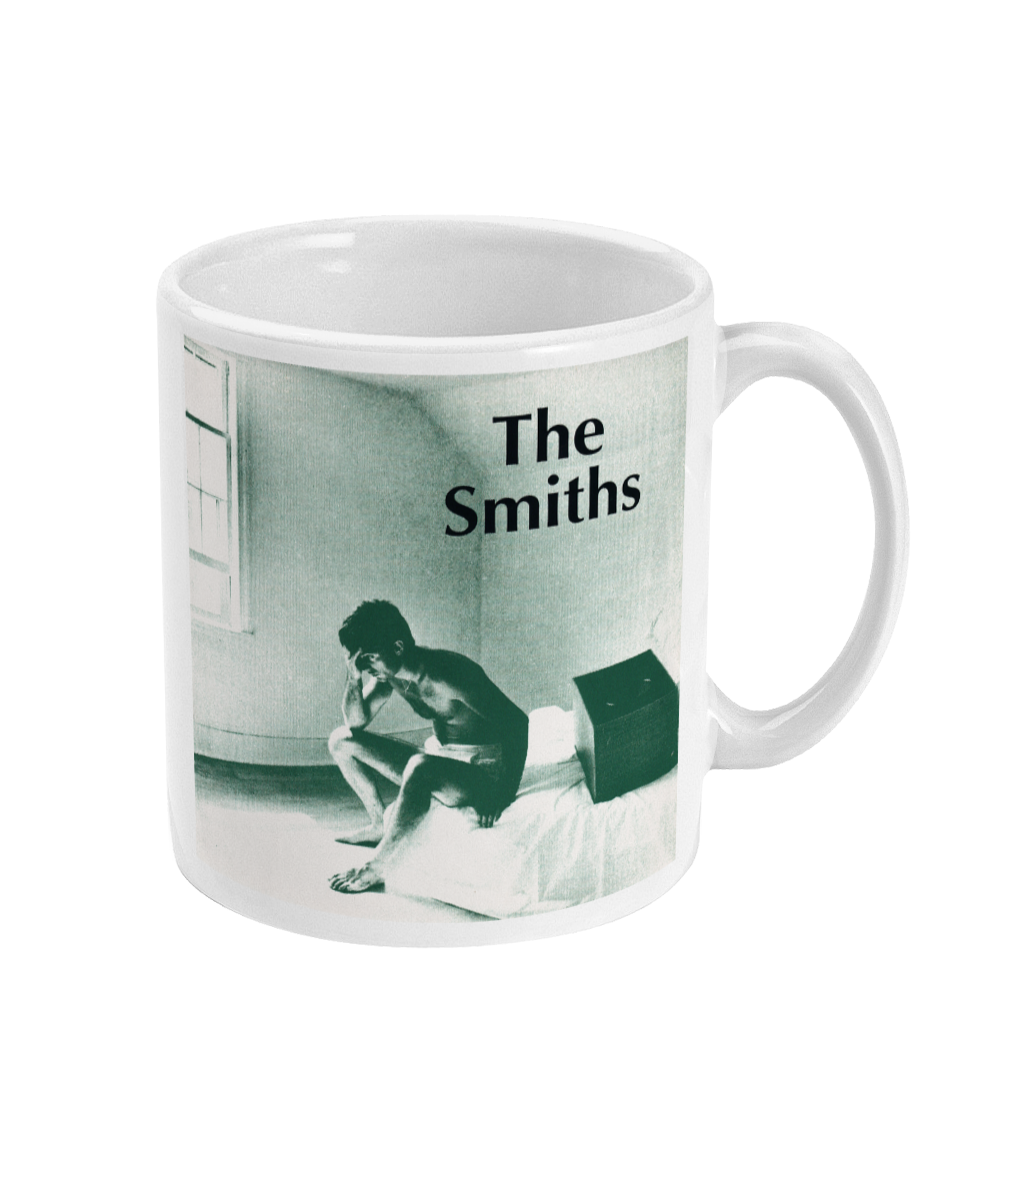 The Smiths - William, It Was Really Nothing - 1984 - Mug